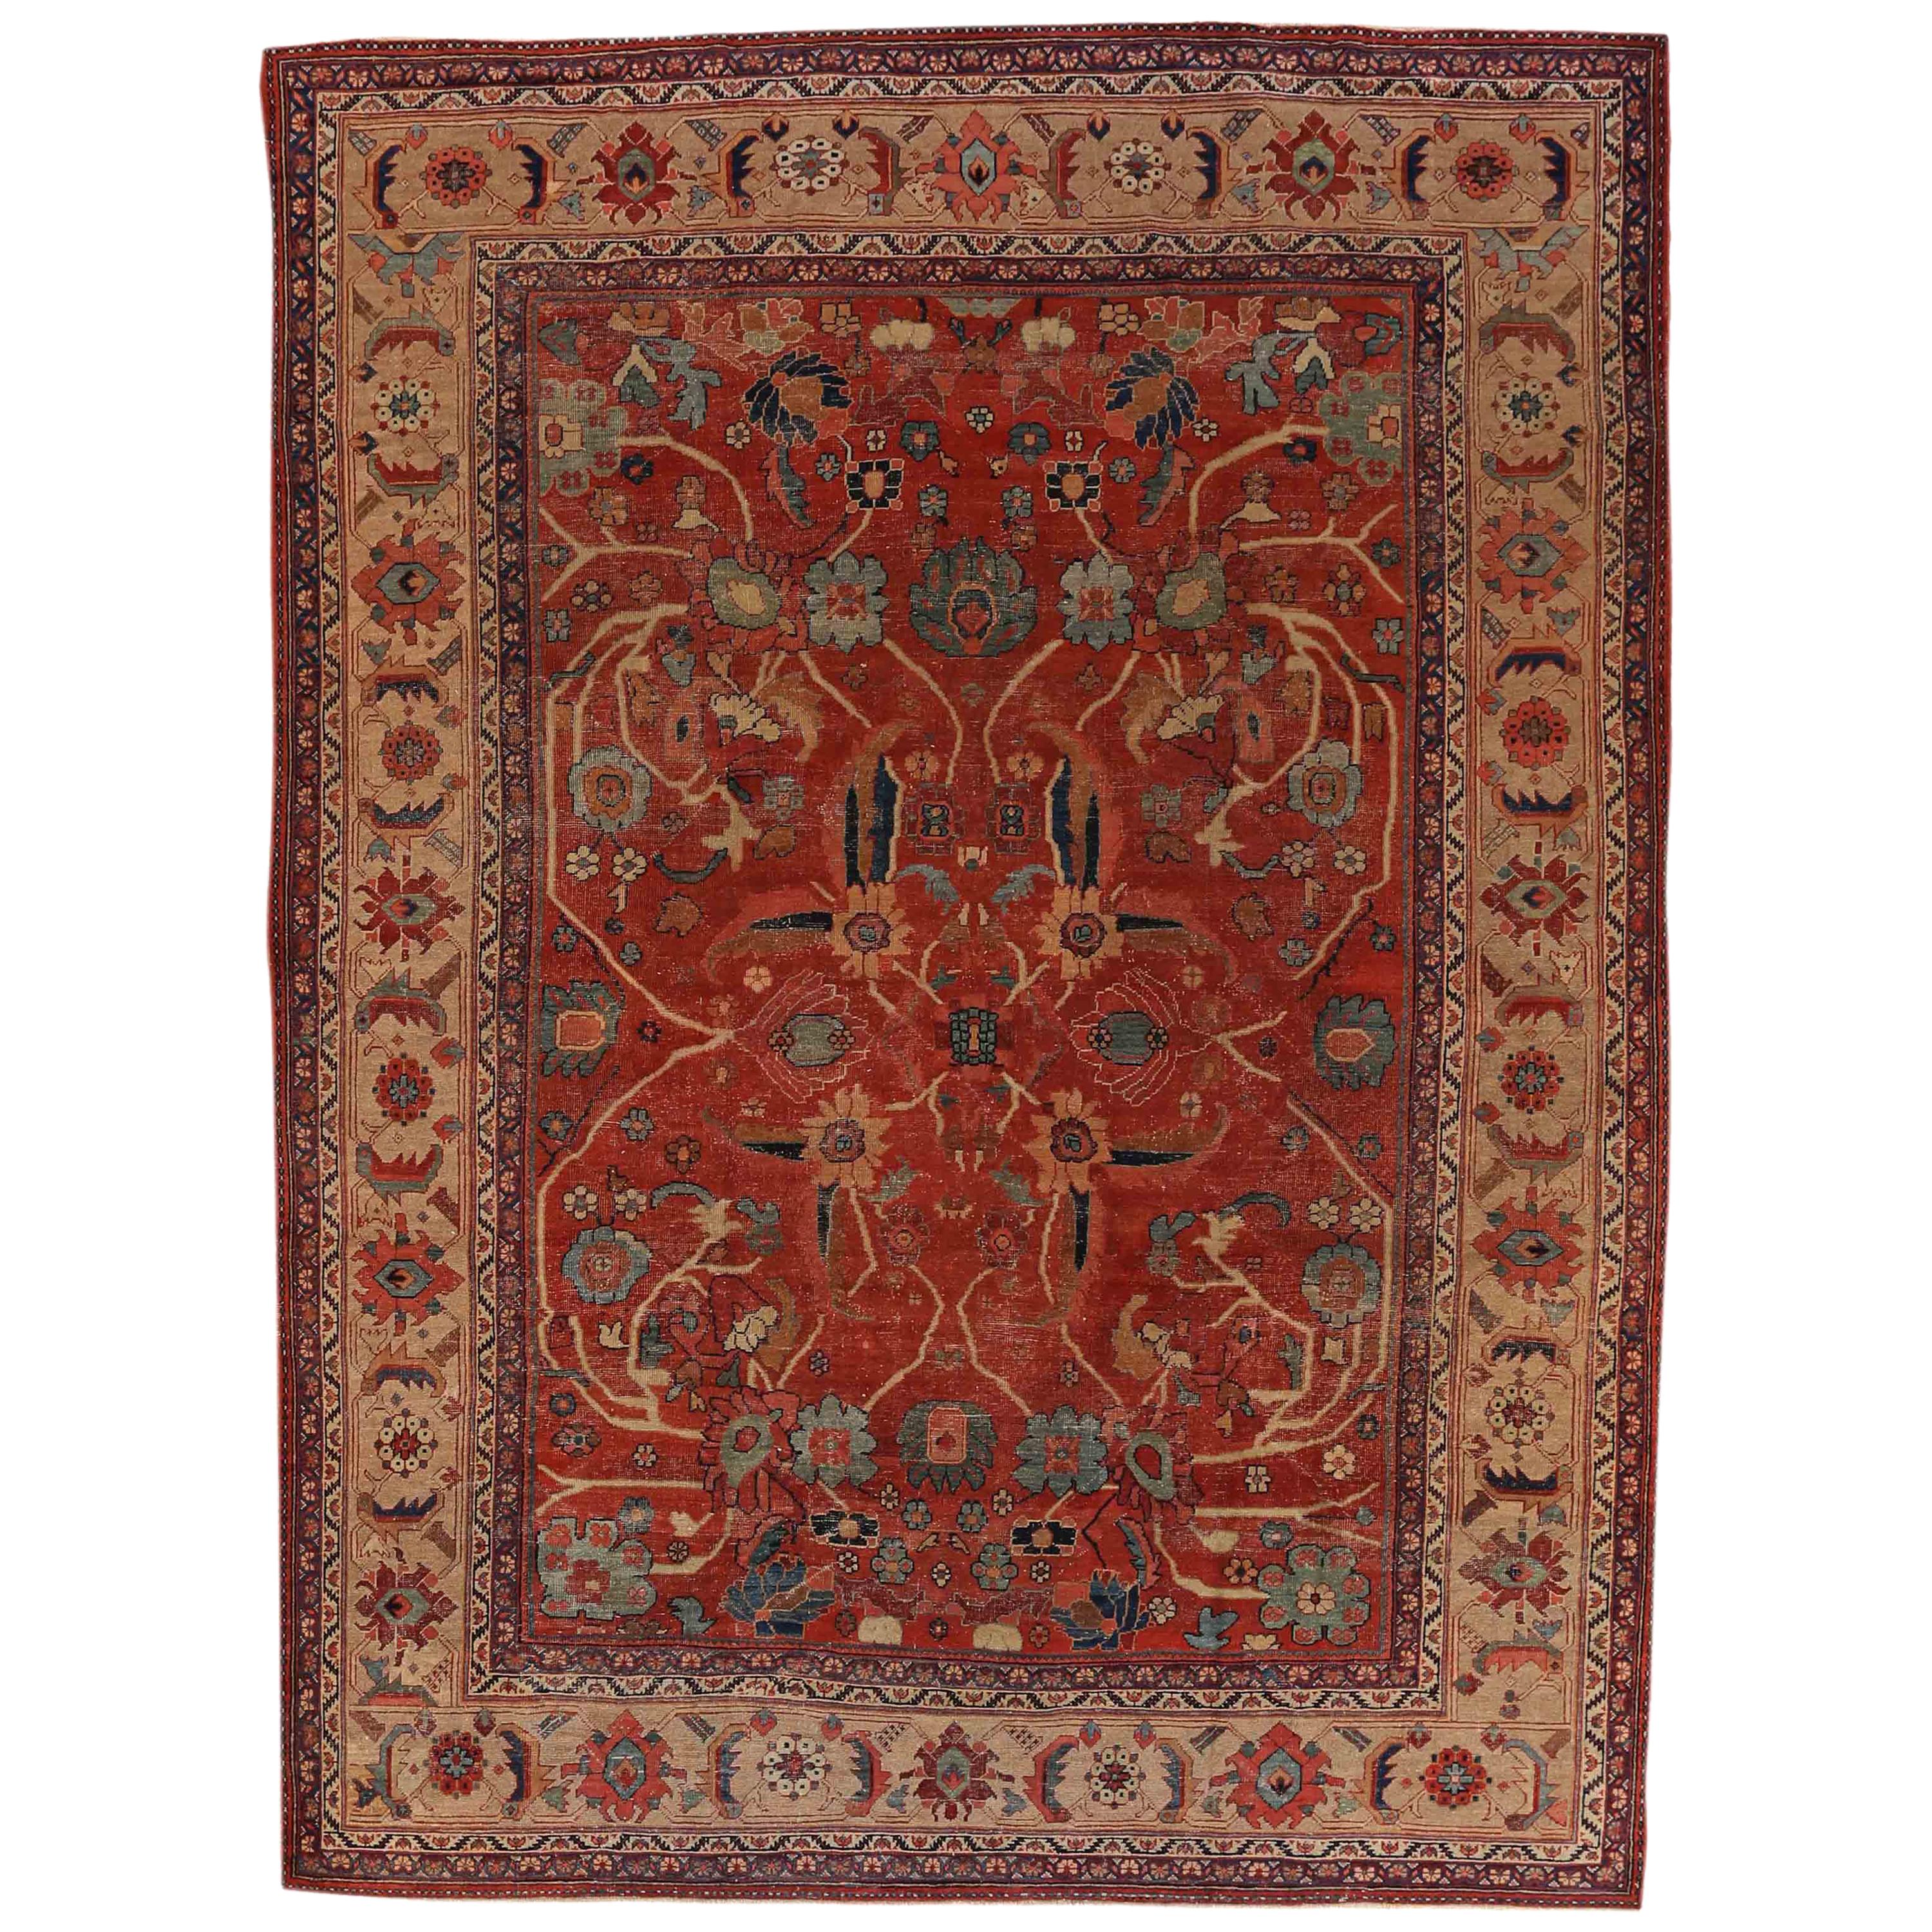 1940s Oversized Antique Sultanabad Persian Rug with Red and Black Floral Motif